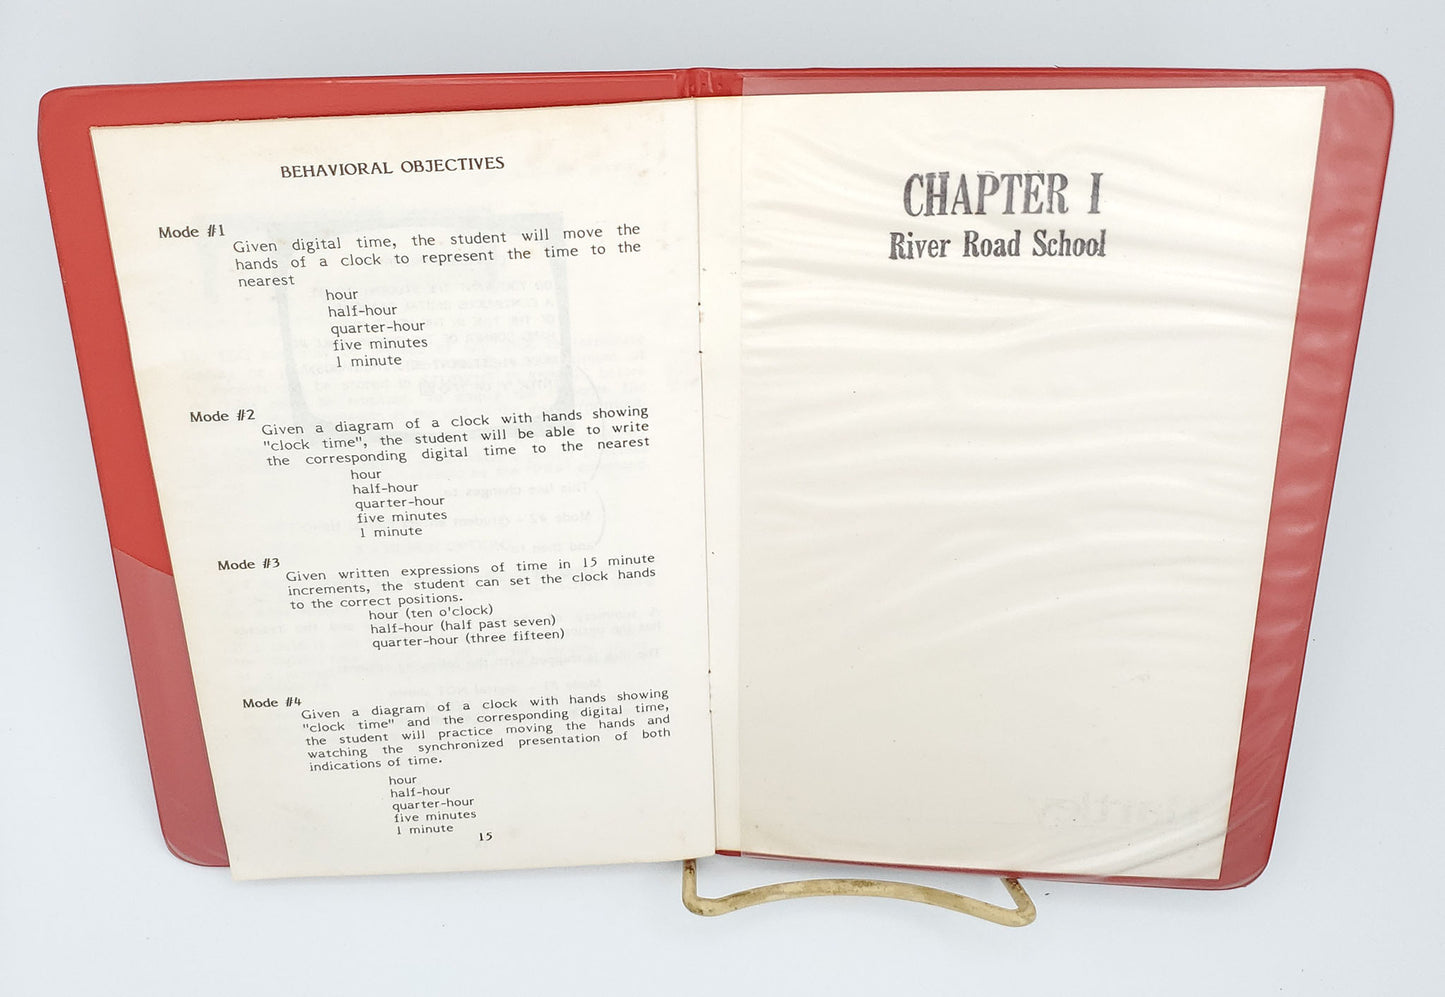 Clock Chapter 1 for the Apple II